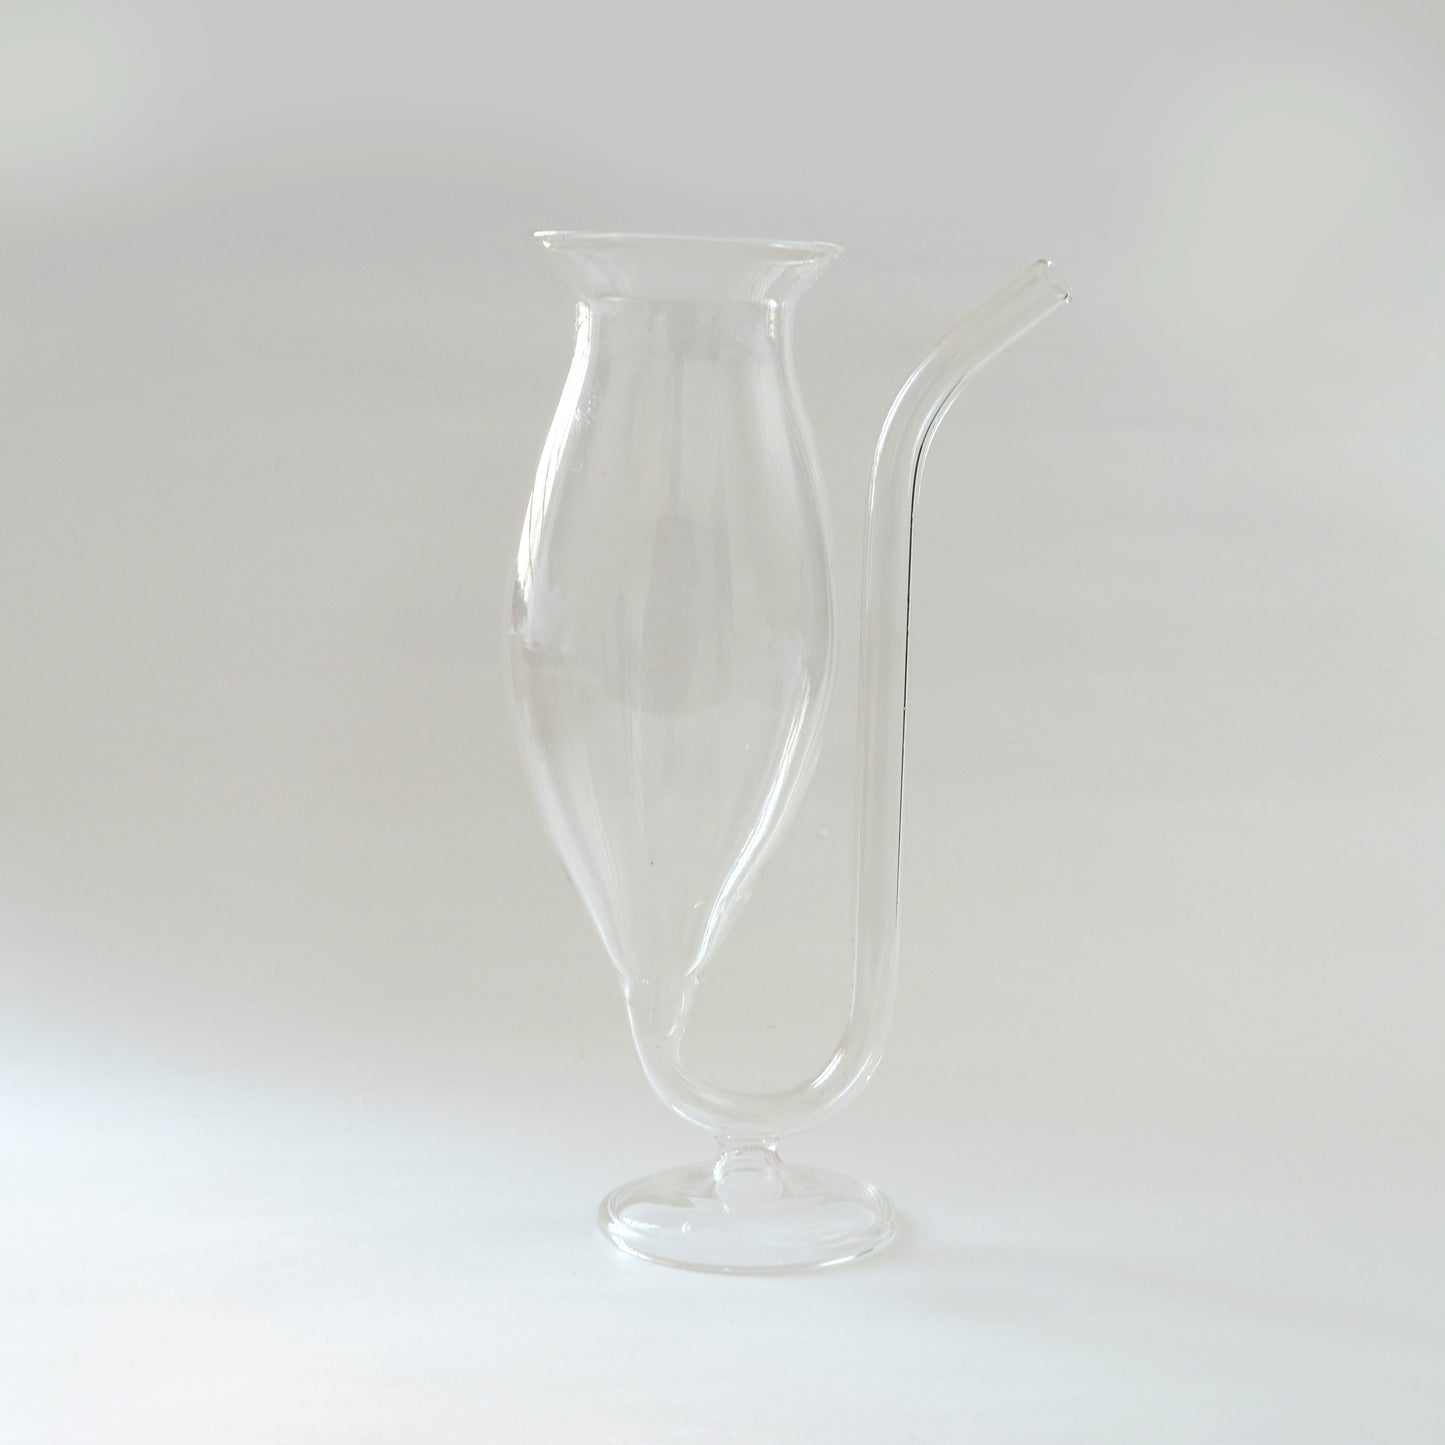 Tail Wine Glass with built-in straw (400 ml)